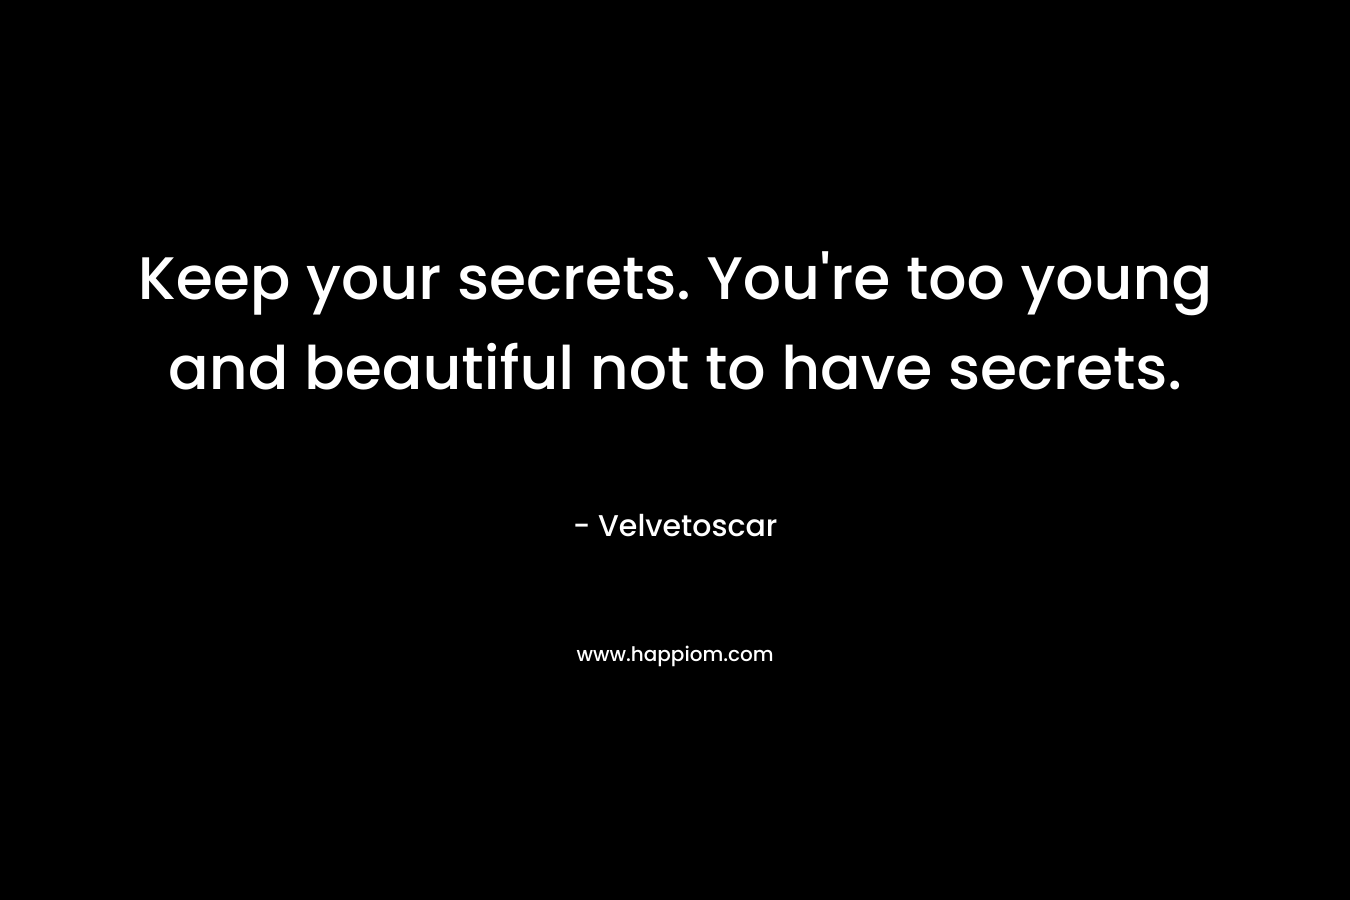 Keep your secrets. You're too young and beautiful not to have secrets.